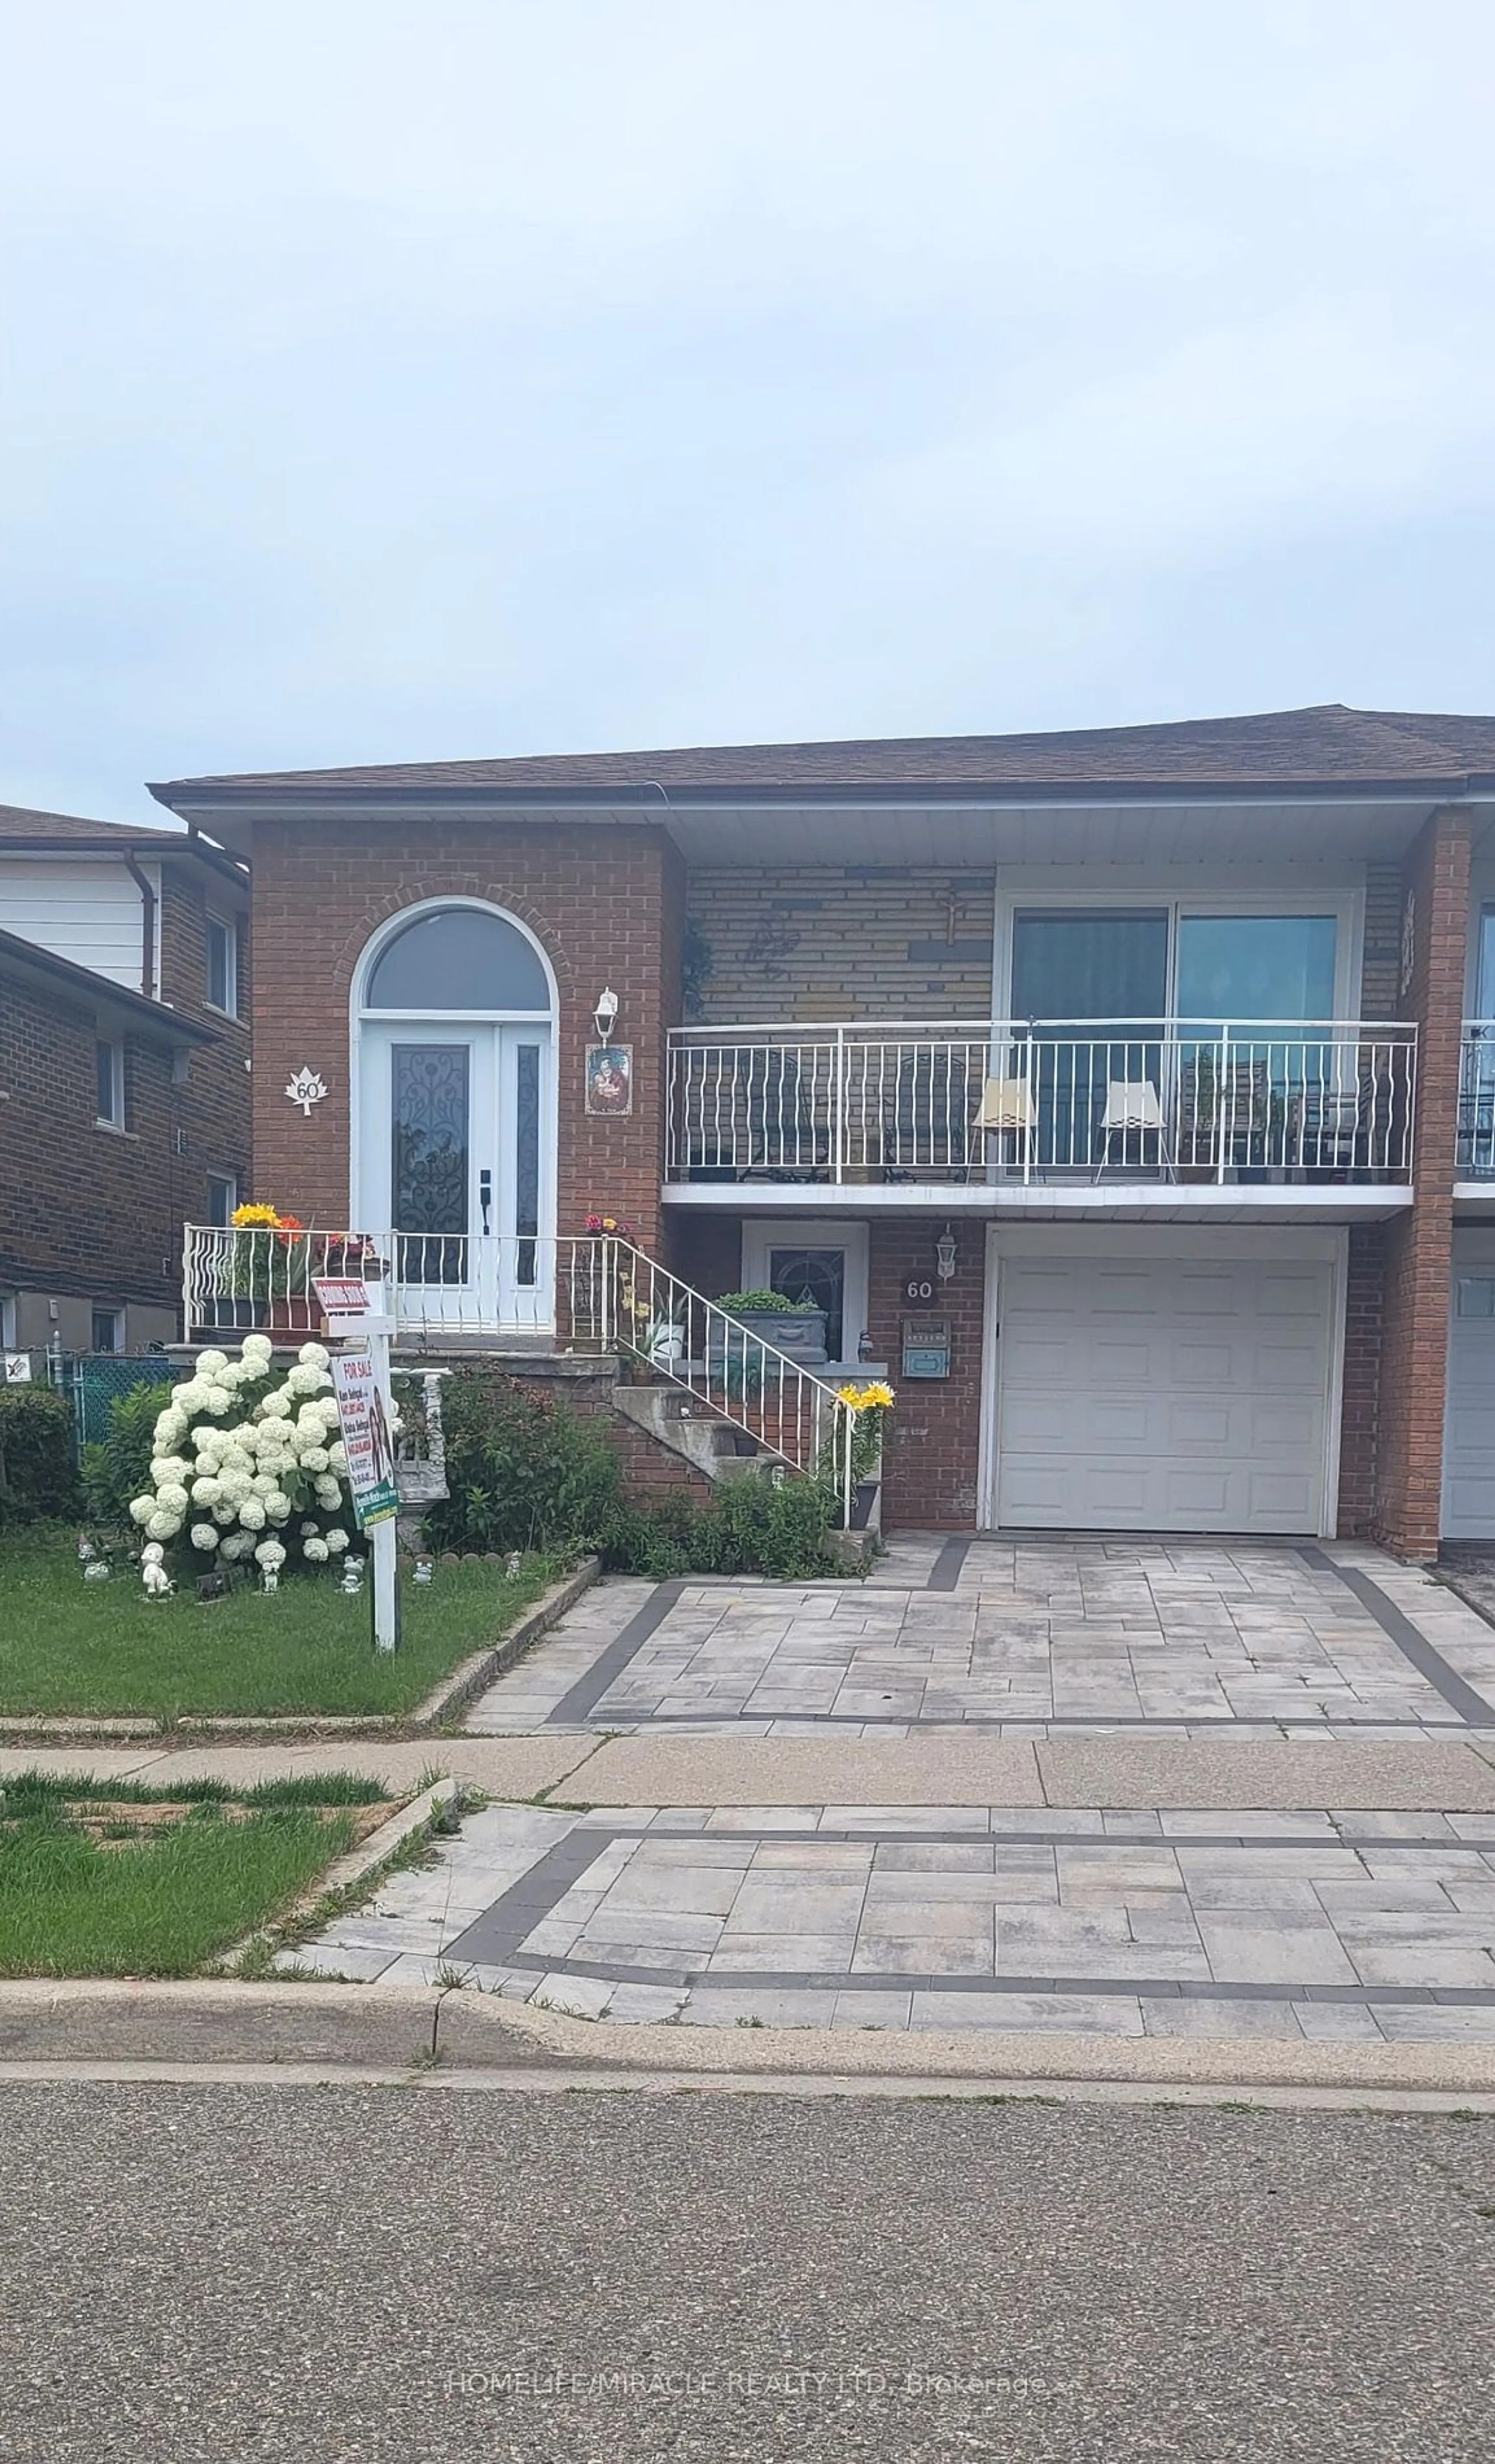 Home with brick exterior material for 60 Prouse Dr, Brampton Ontario L6V 3A8